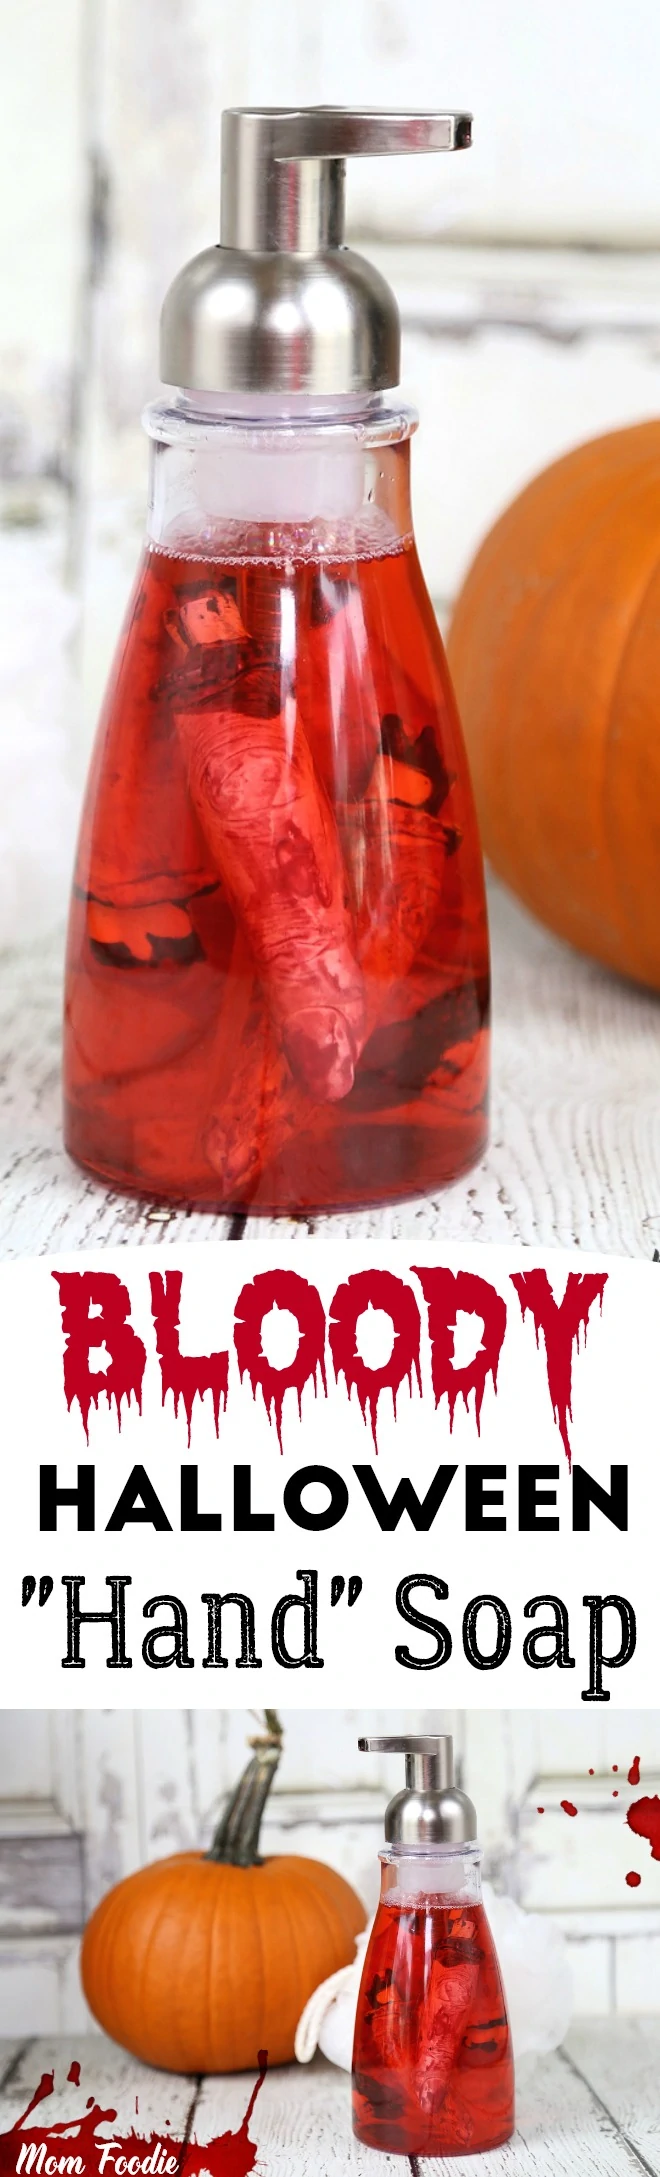 Bloody Halloween Hand Soap - Easy DIY Halloween Craft prop project, foaming hand soap with severed fingers